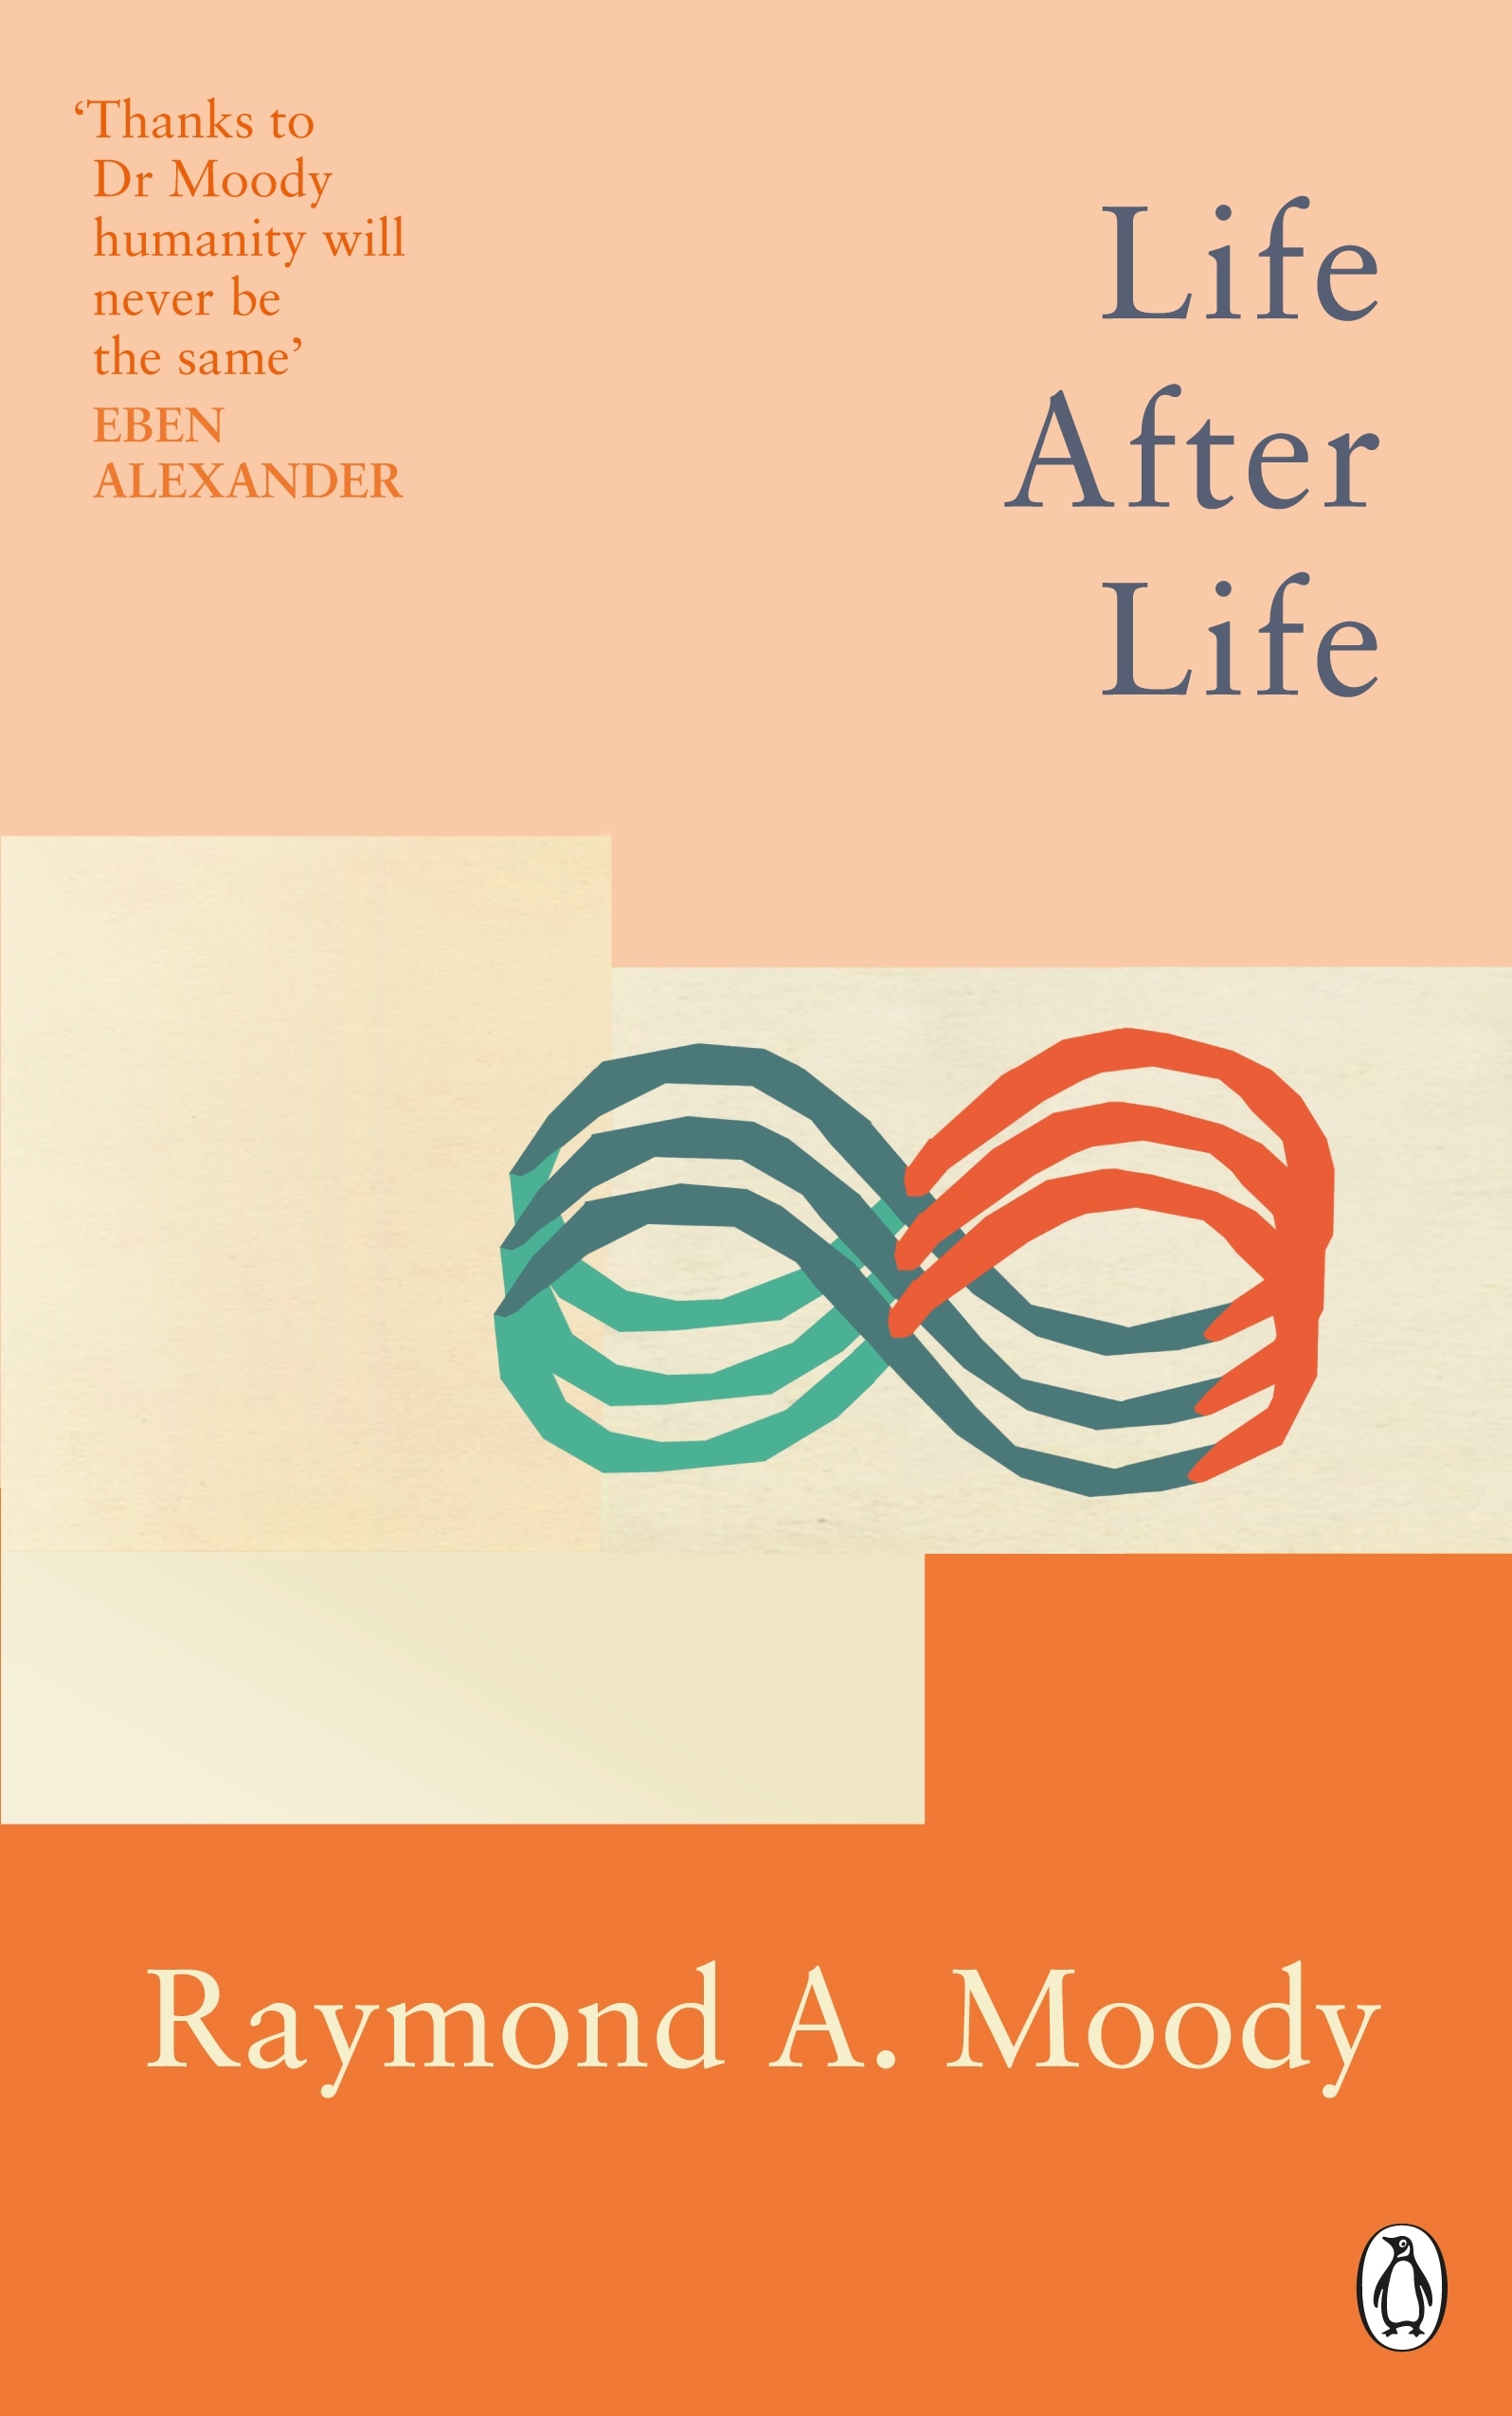 Book “Life After Life” by Raymond Moody — January 6, 2022